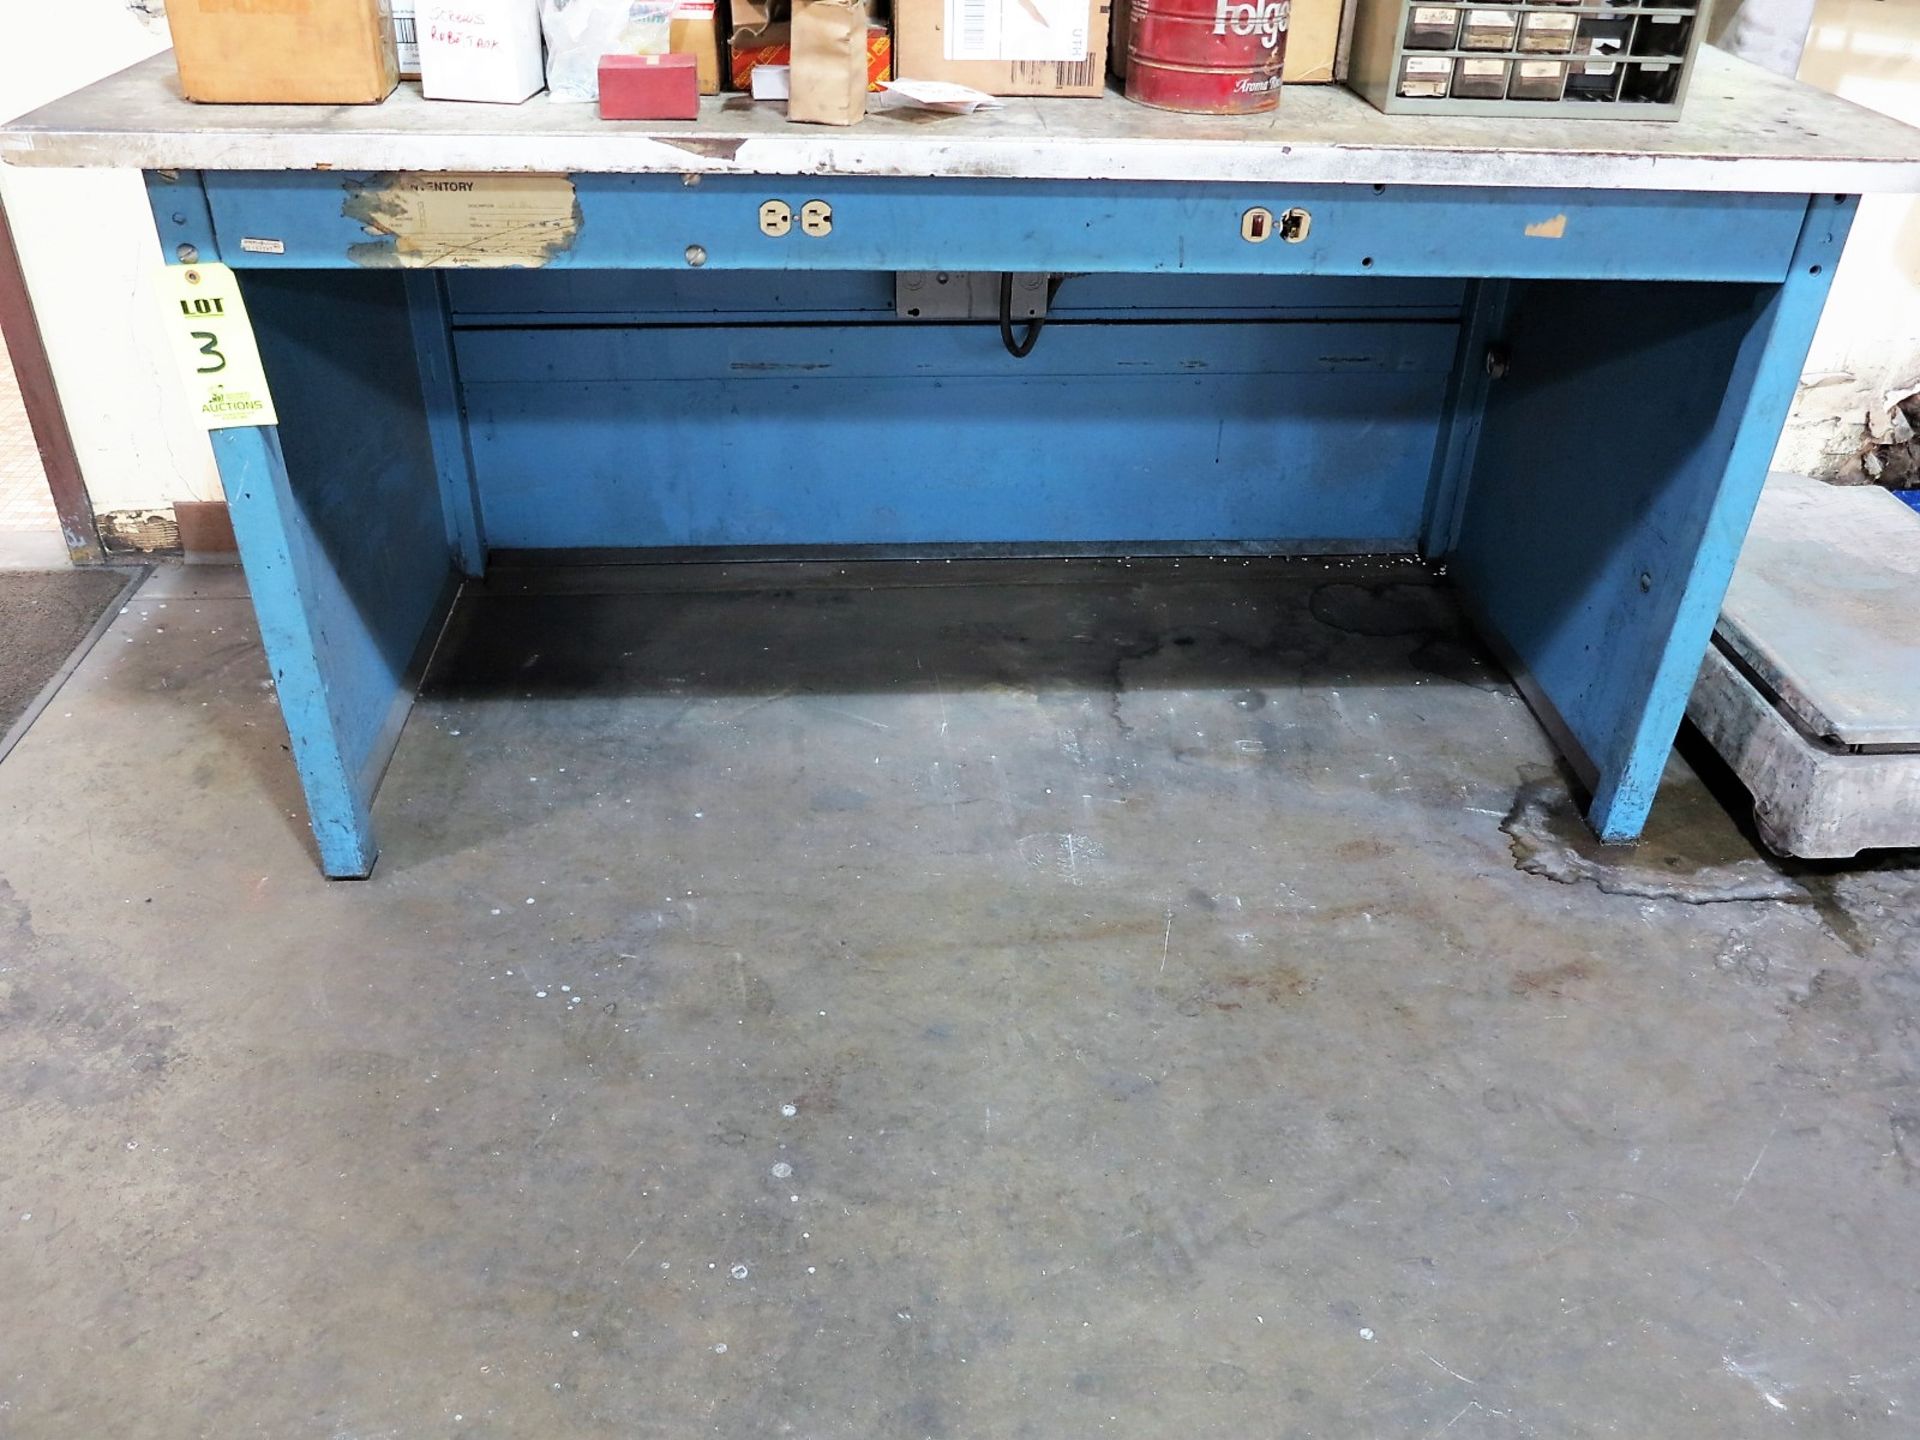 36"X72" TABLE, ELECTRICAL OUTLETS